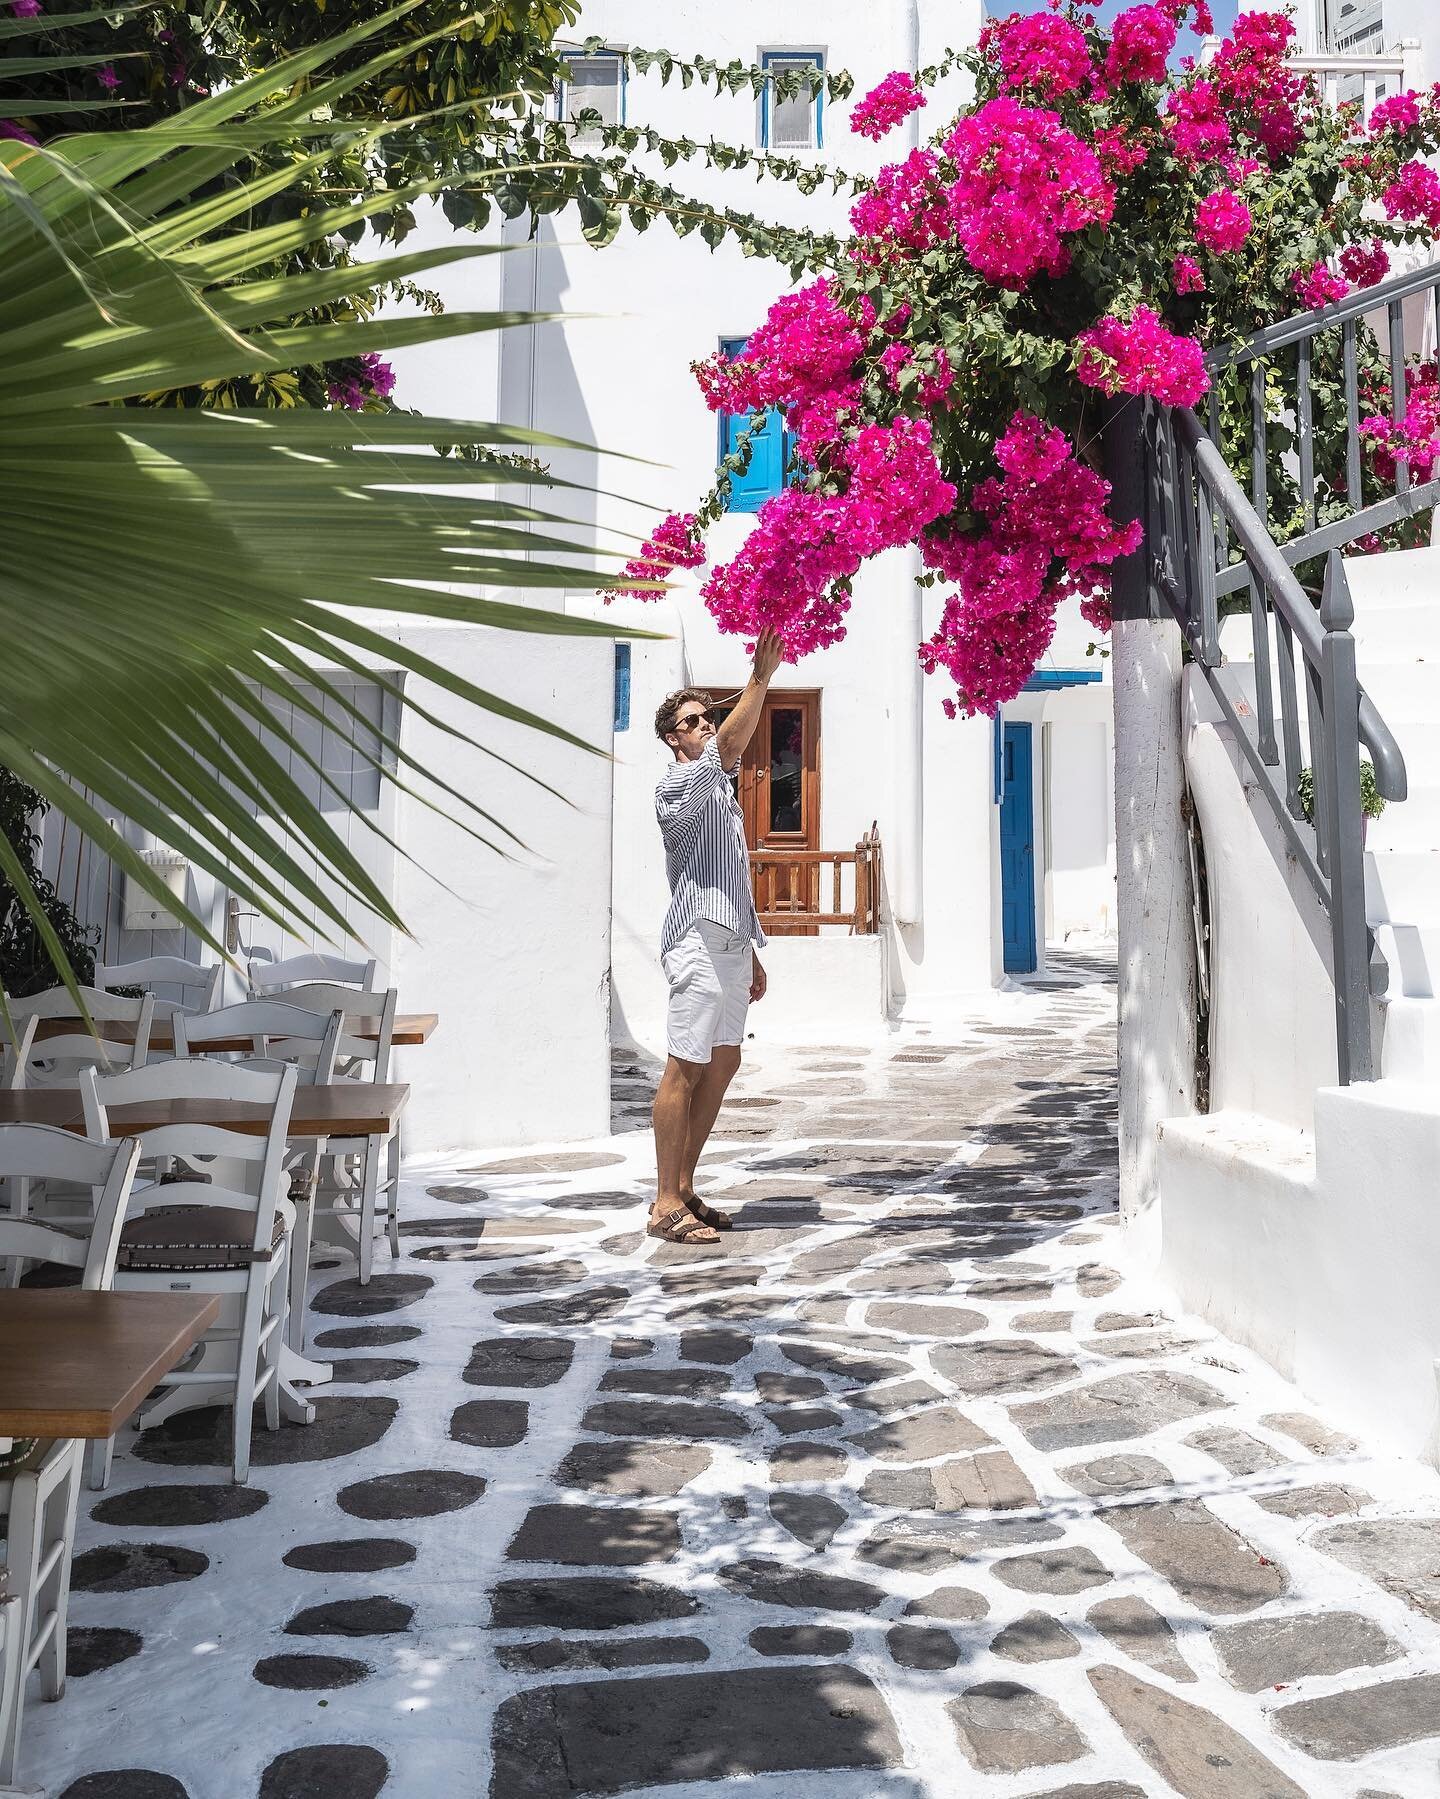 Can somebody help me with a masculine caption please🌺
.
.
.

#greece #mykonos #vacation #instagram #beautifuldestinations #moodygrams #folkgreen #timeoutsociety #createcommune #earthfocus #earth #visualsofearth #lensbible #earthpix #artofvisuals #ro